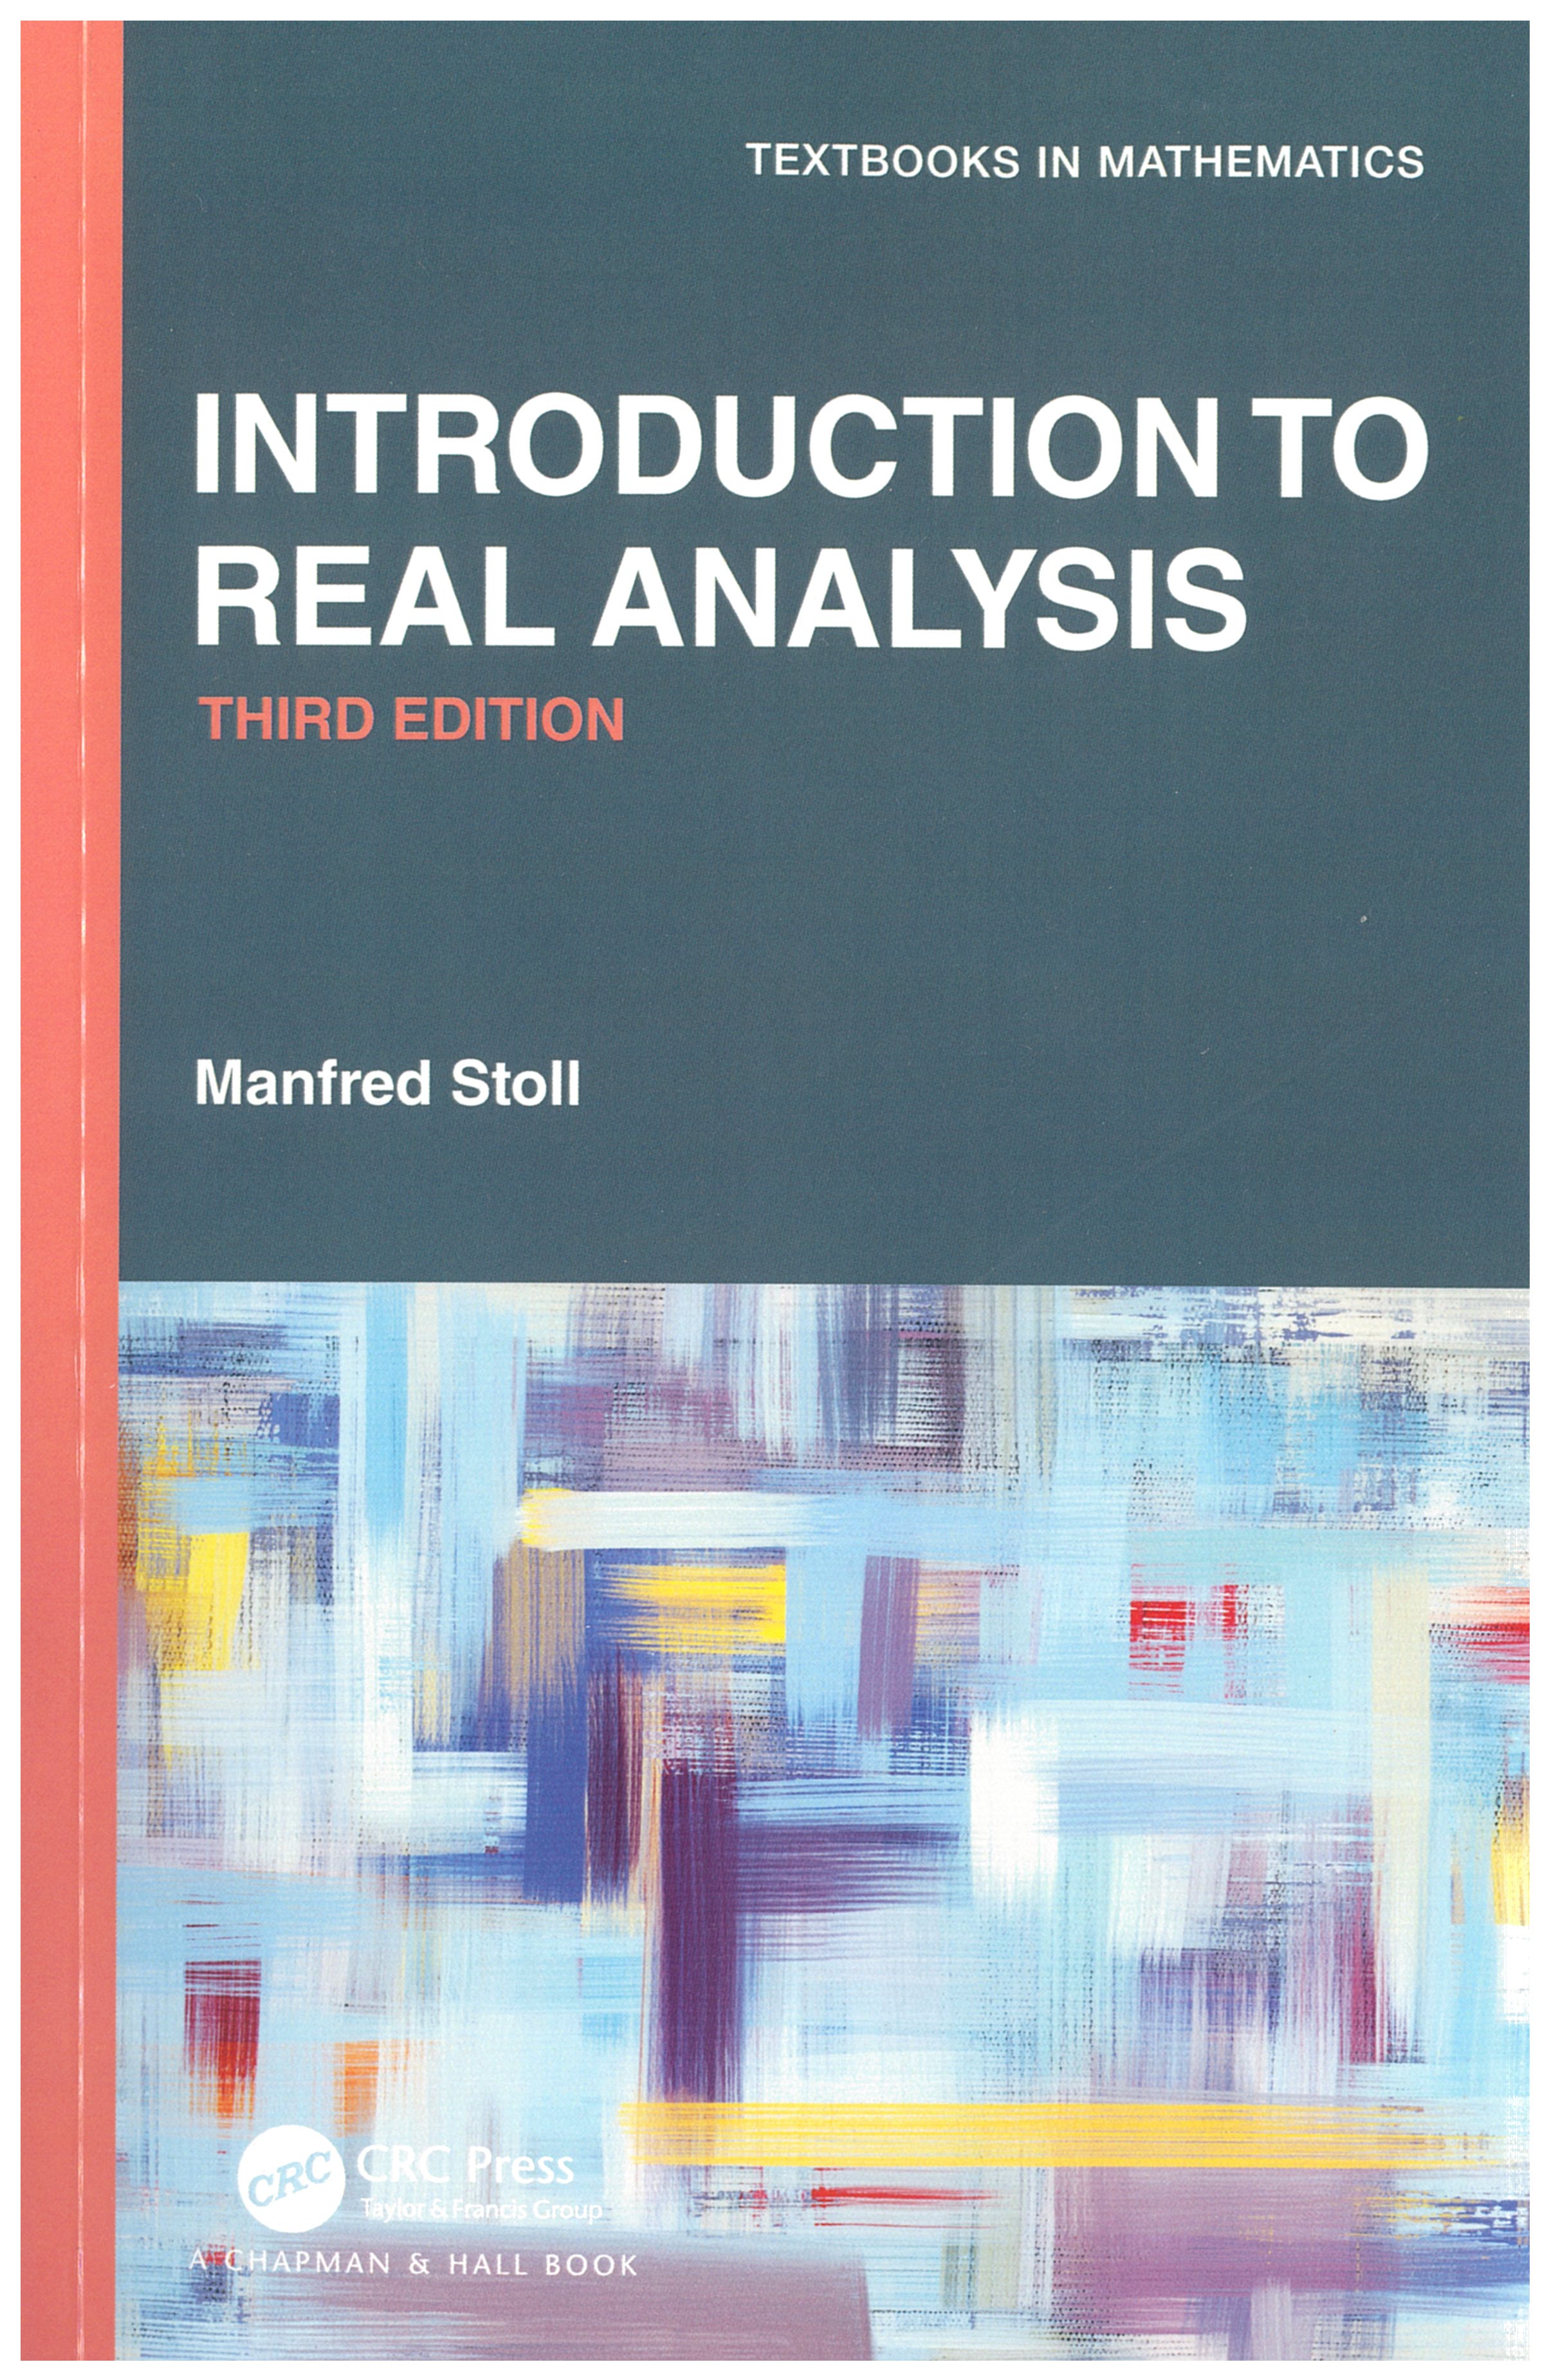 Introduction to Real Analysis, 3rd